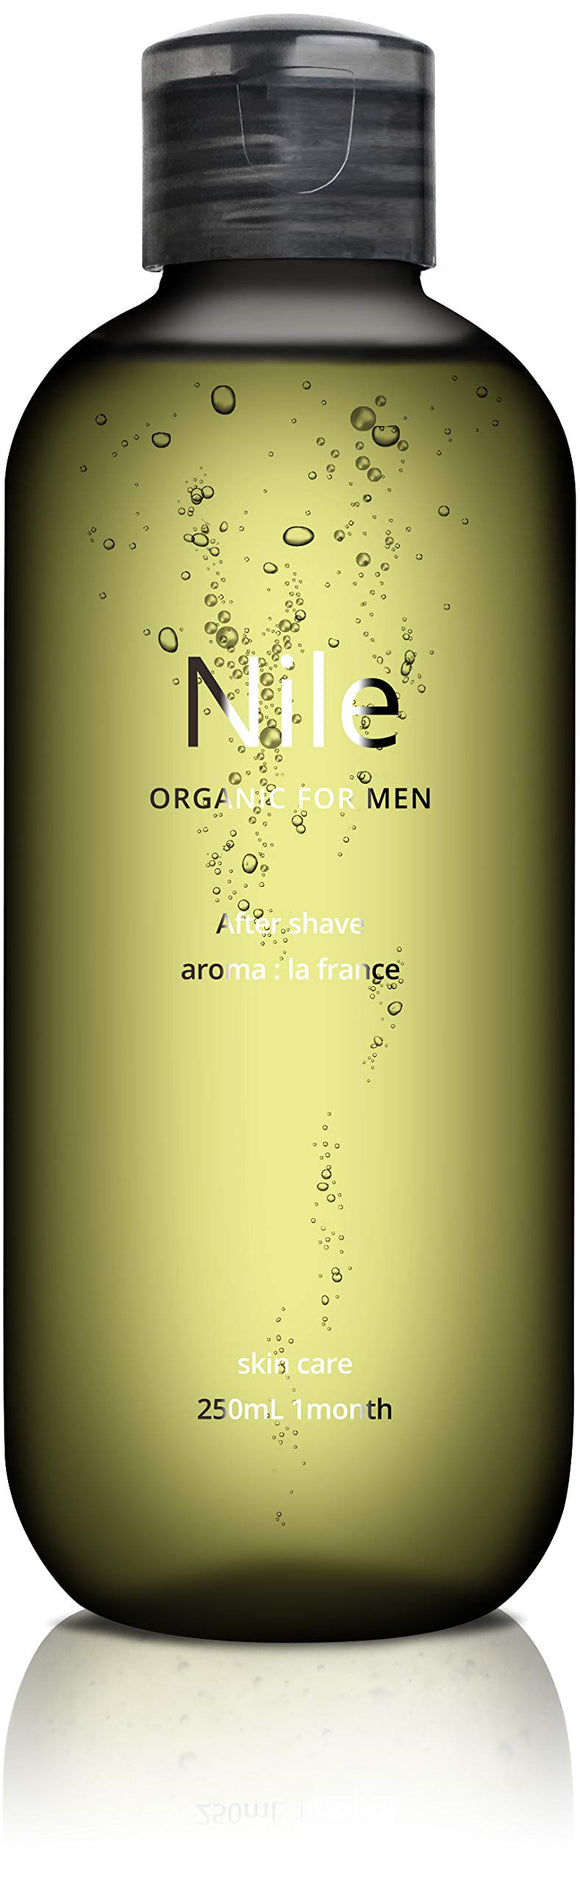 Nile aftershave lotion after shaving unwanted hair lotion men's 250mL